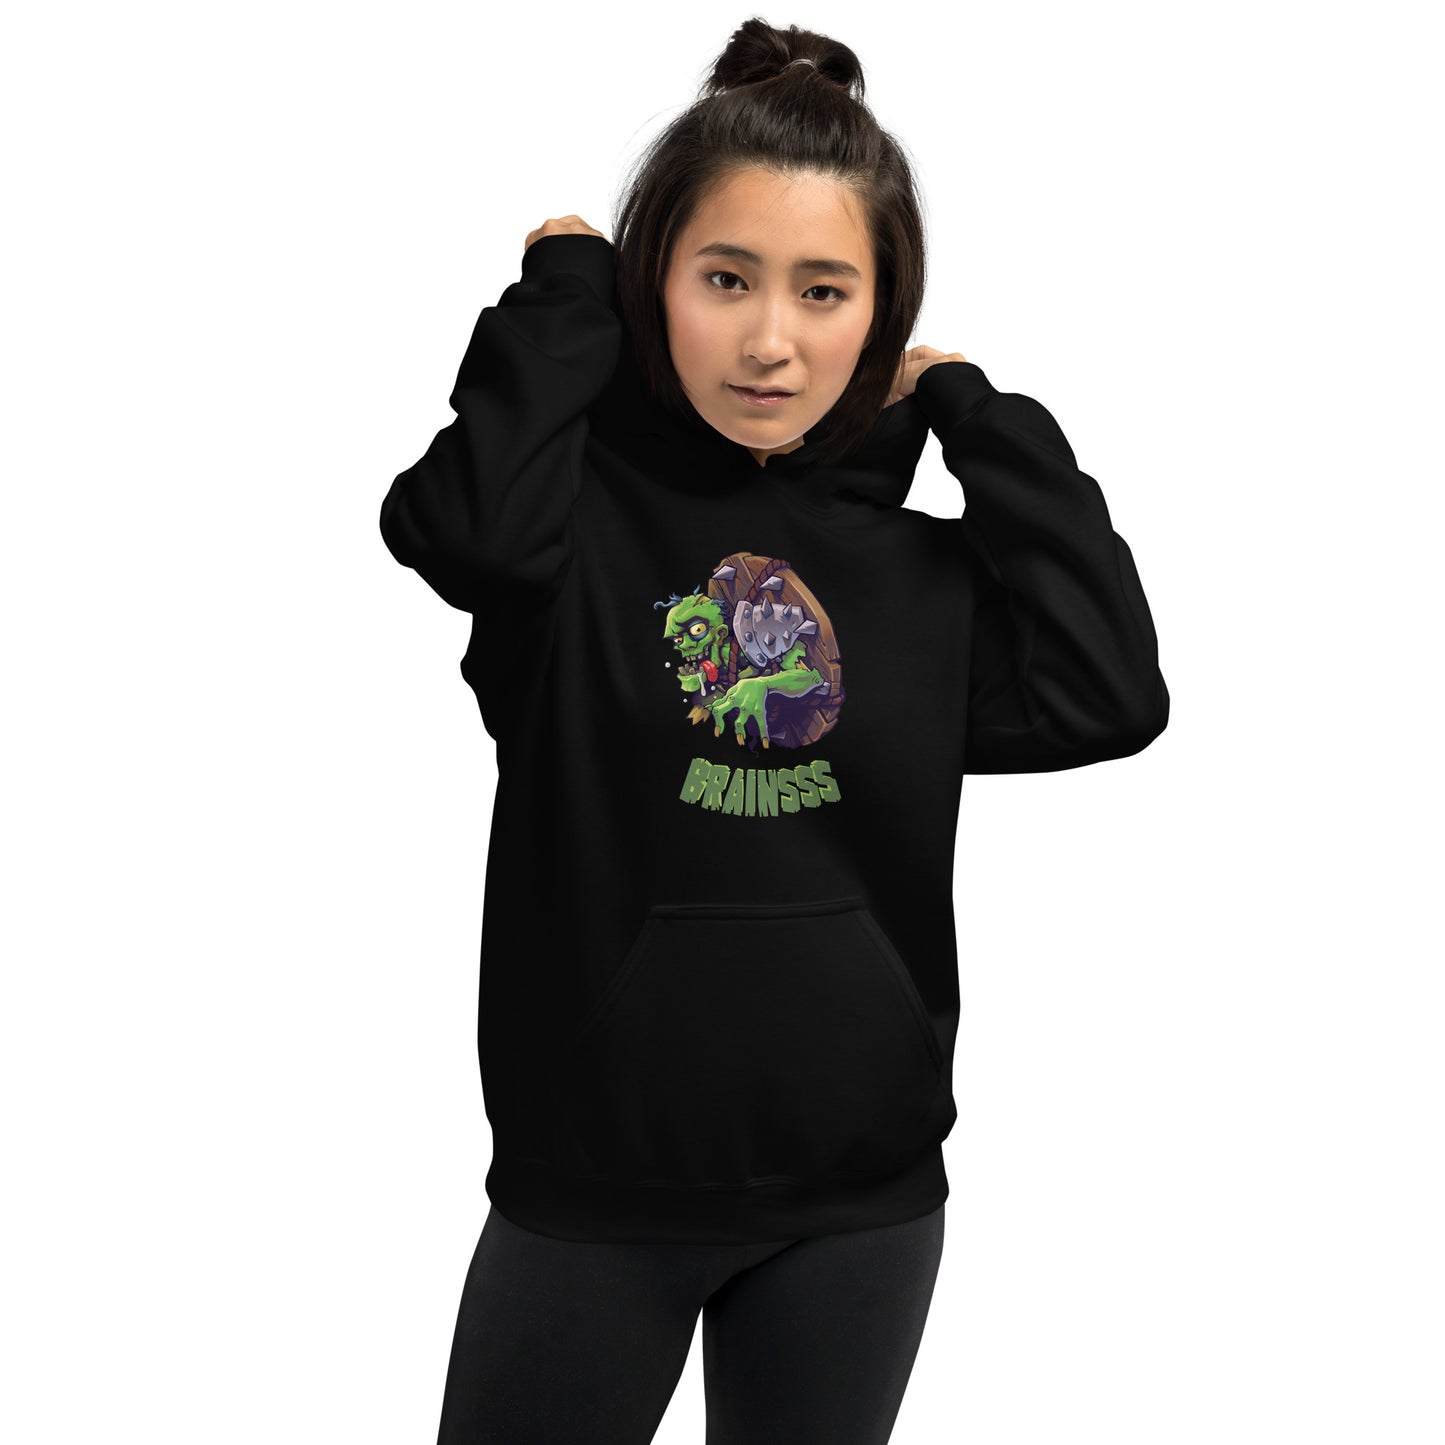 Lawyers & Dragons - Brains Hoodie - Extended Sizes - THREE COLOR OPTIONS!